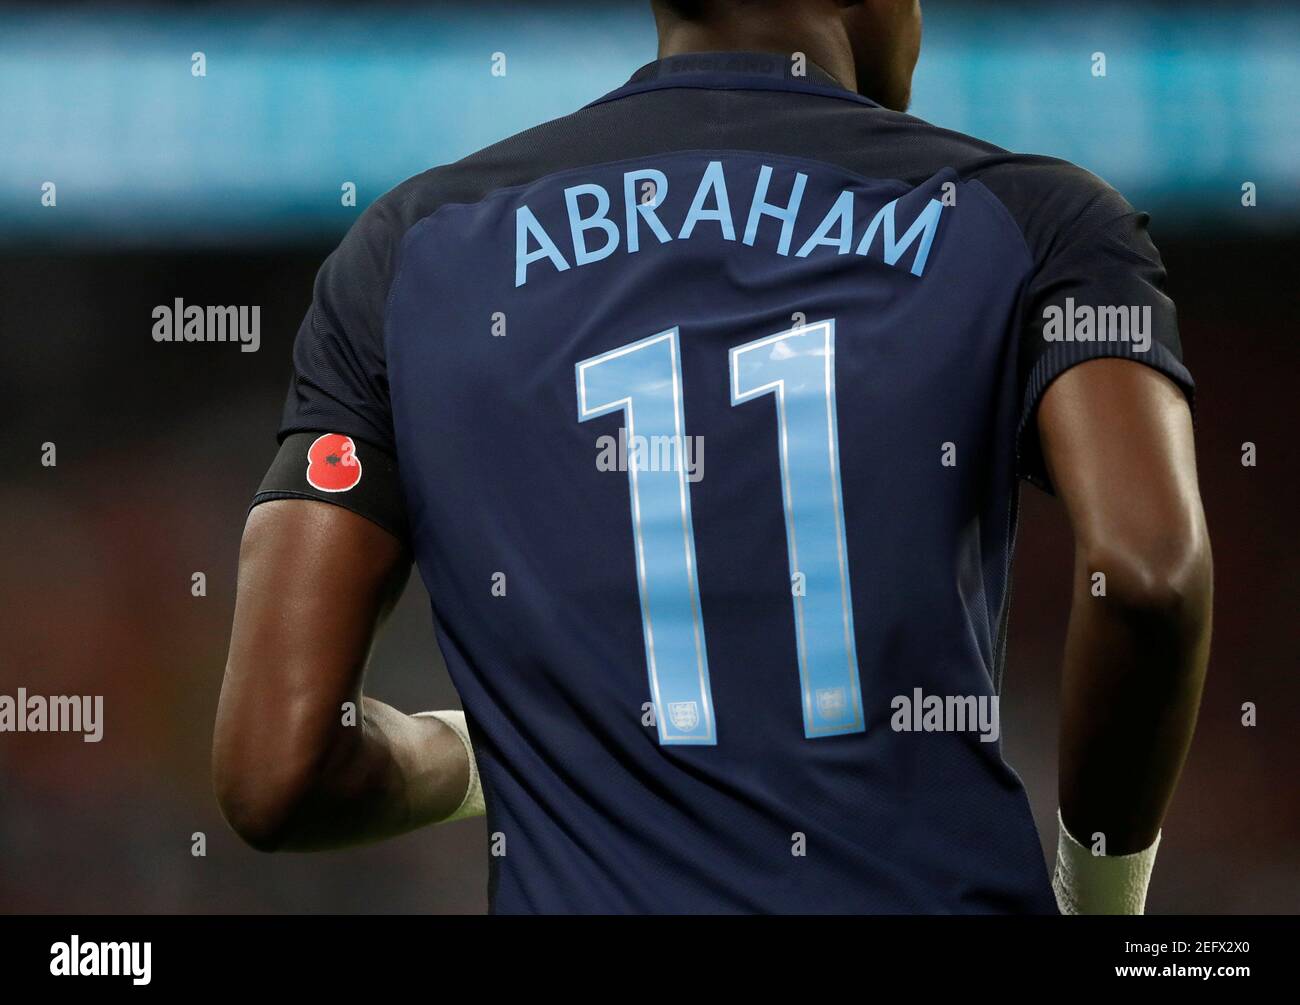 Poppy On Shirt Englands Tammy Abraham High Resolution Stock Photography and  Images - Alamy